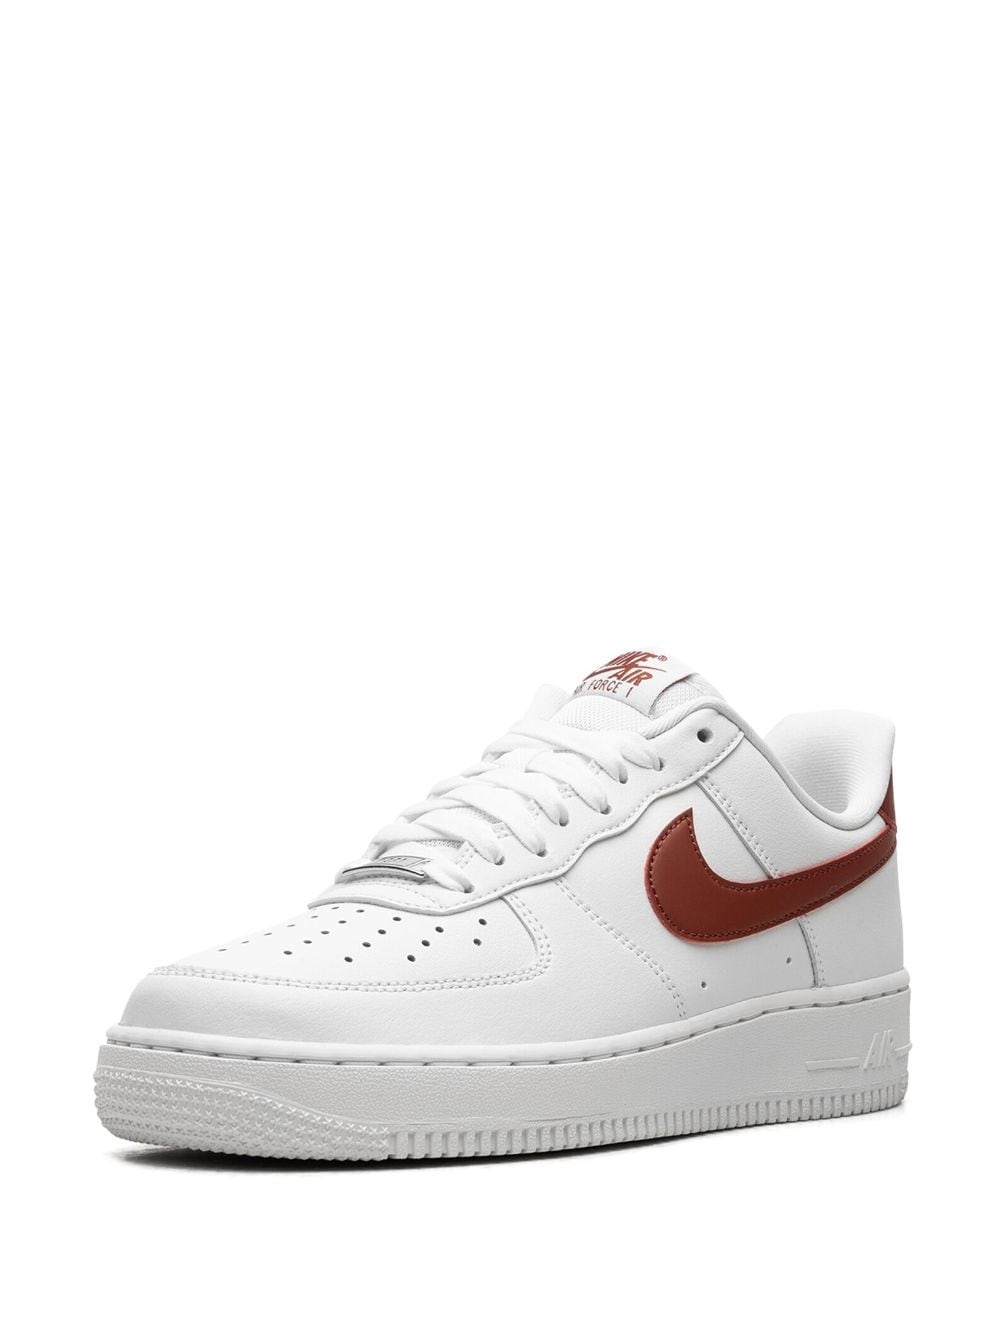 Air Force 1 '07 "White/Rugged Orange" sneakers - 4